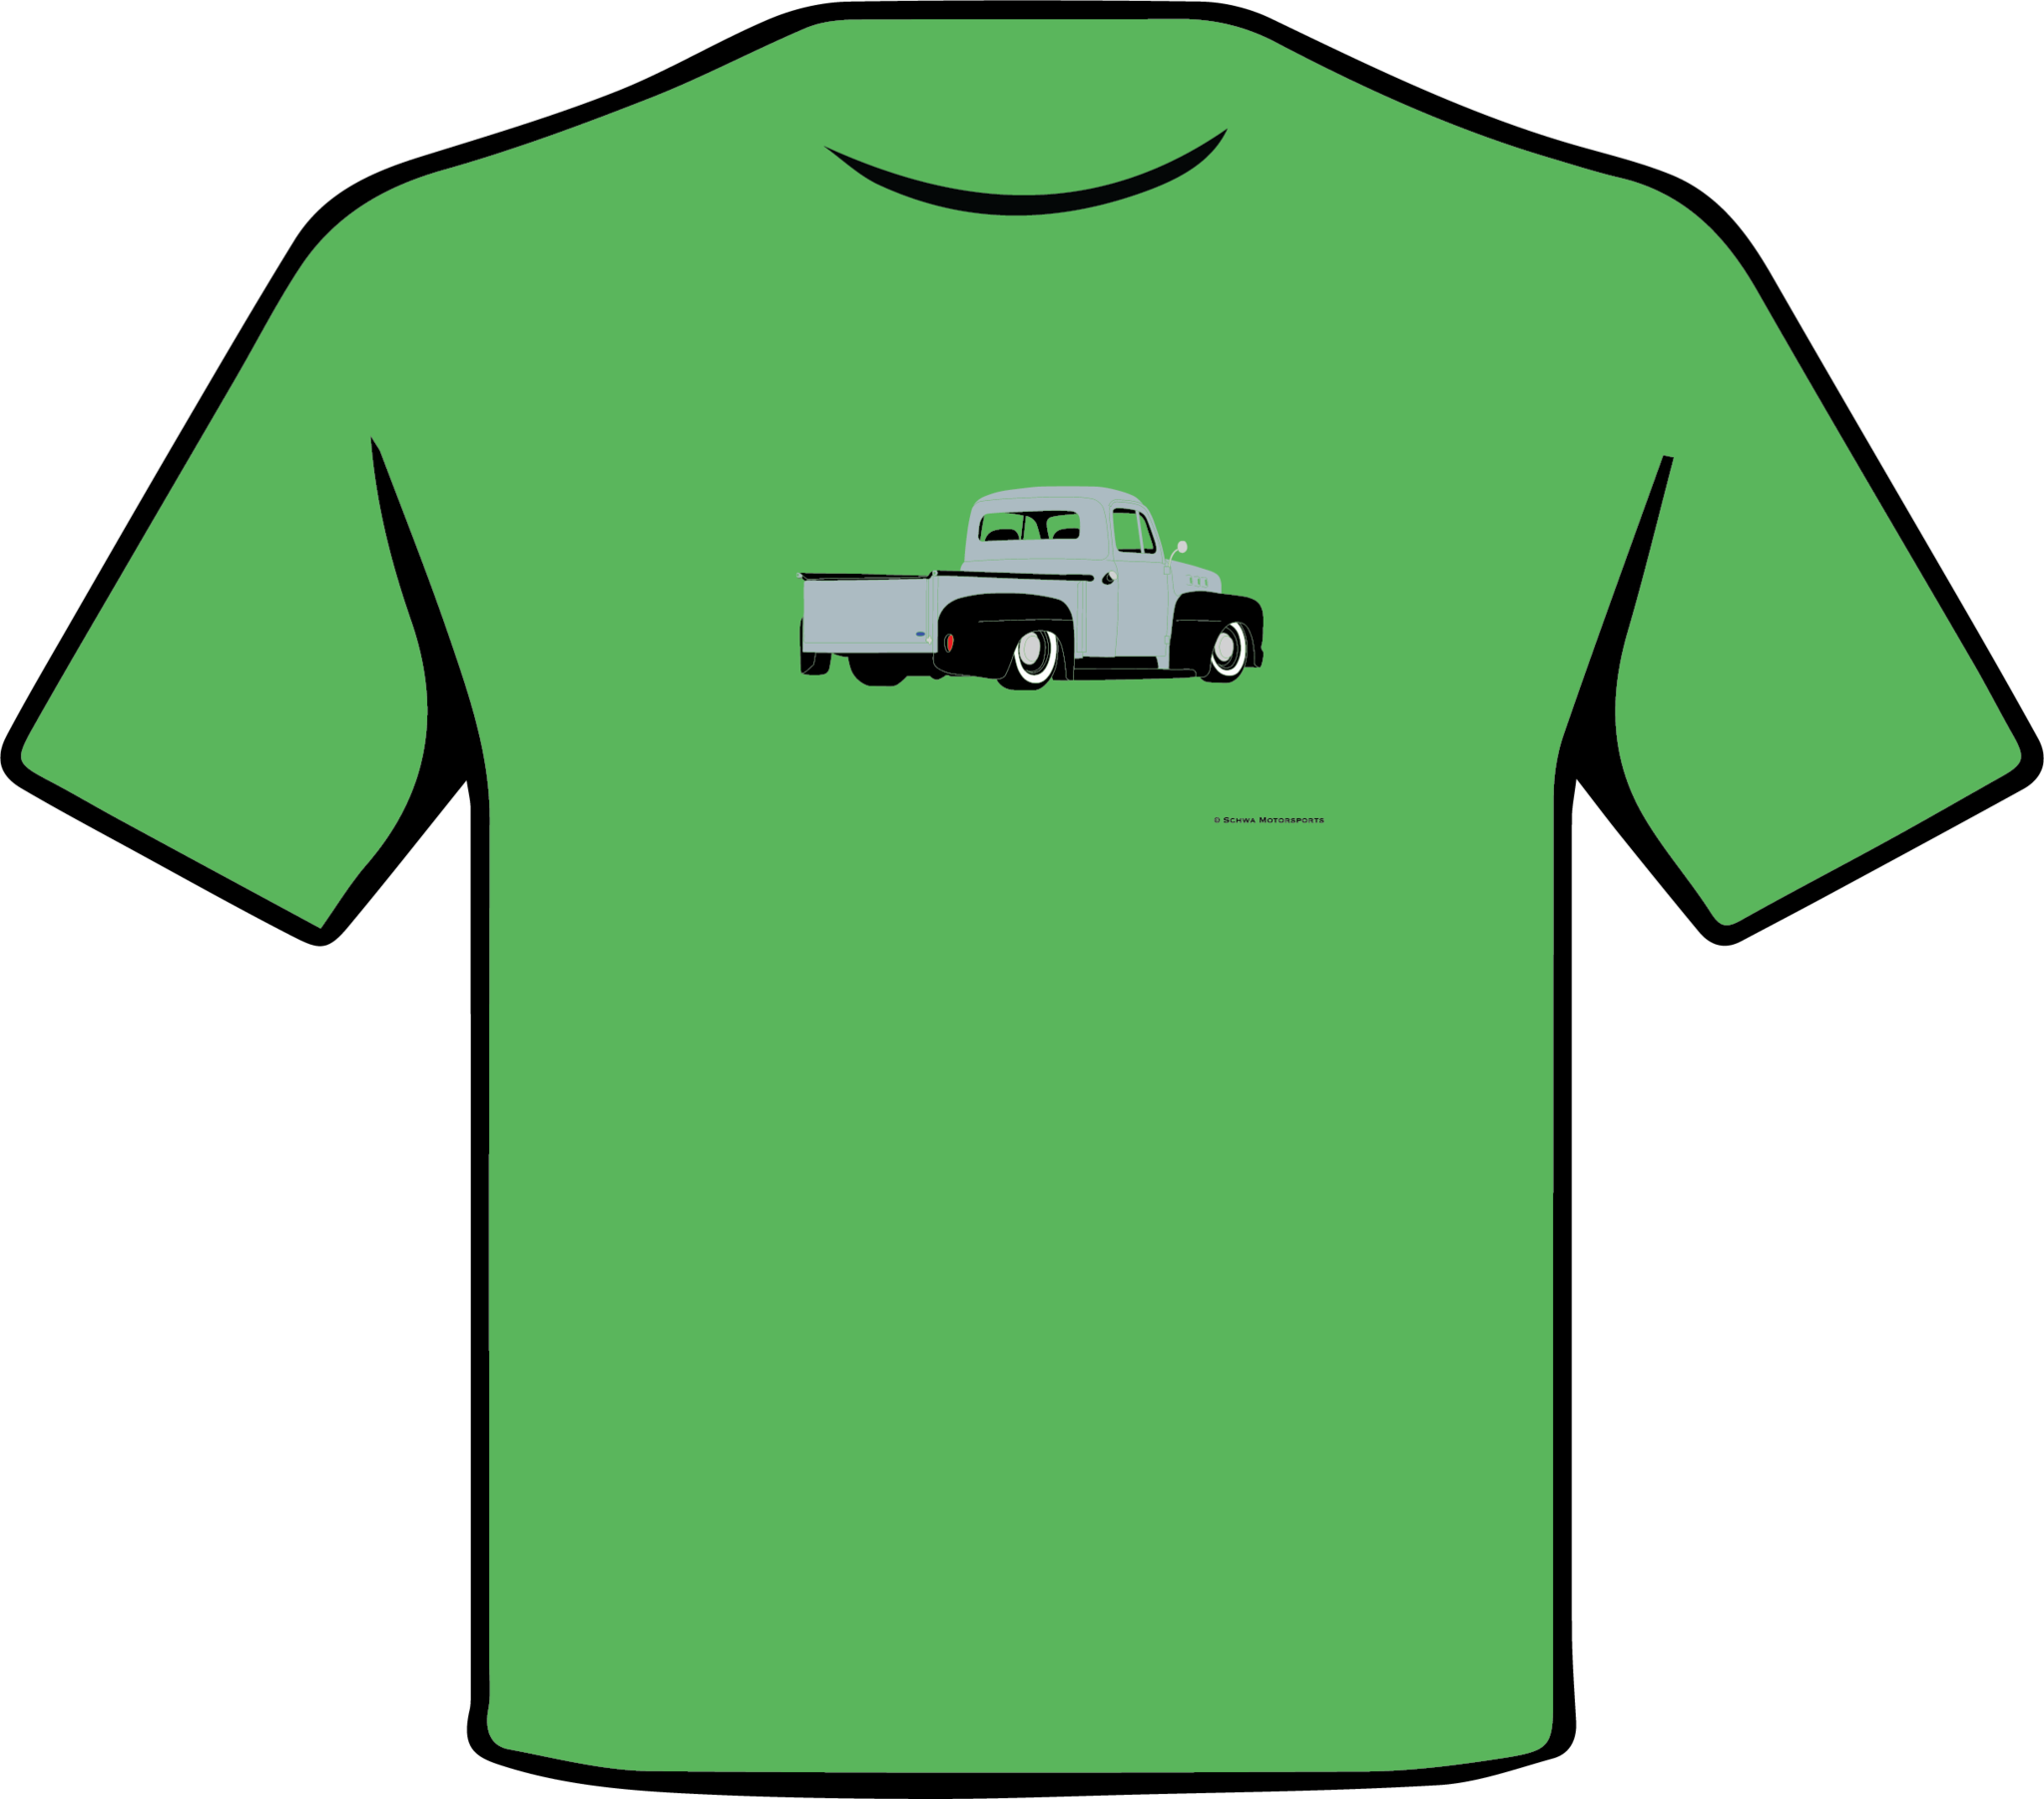 Ford F1 Hotrod Pickup Truck Rear 3/4 Angle Multi Color T-Shirt